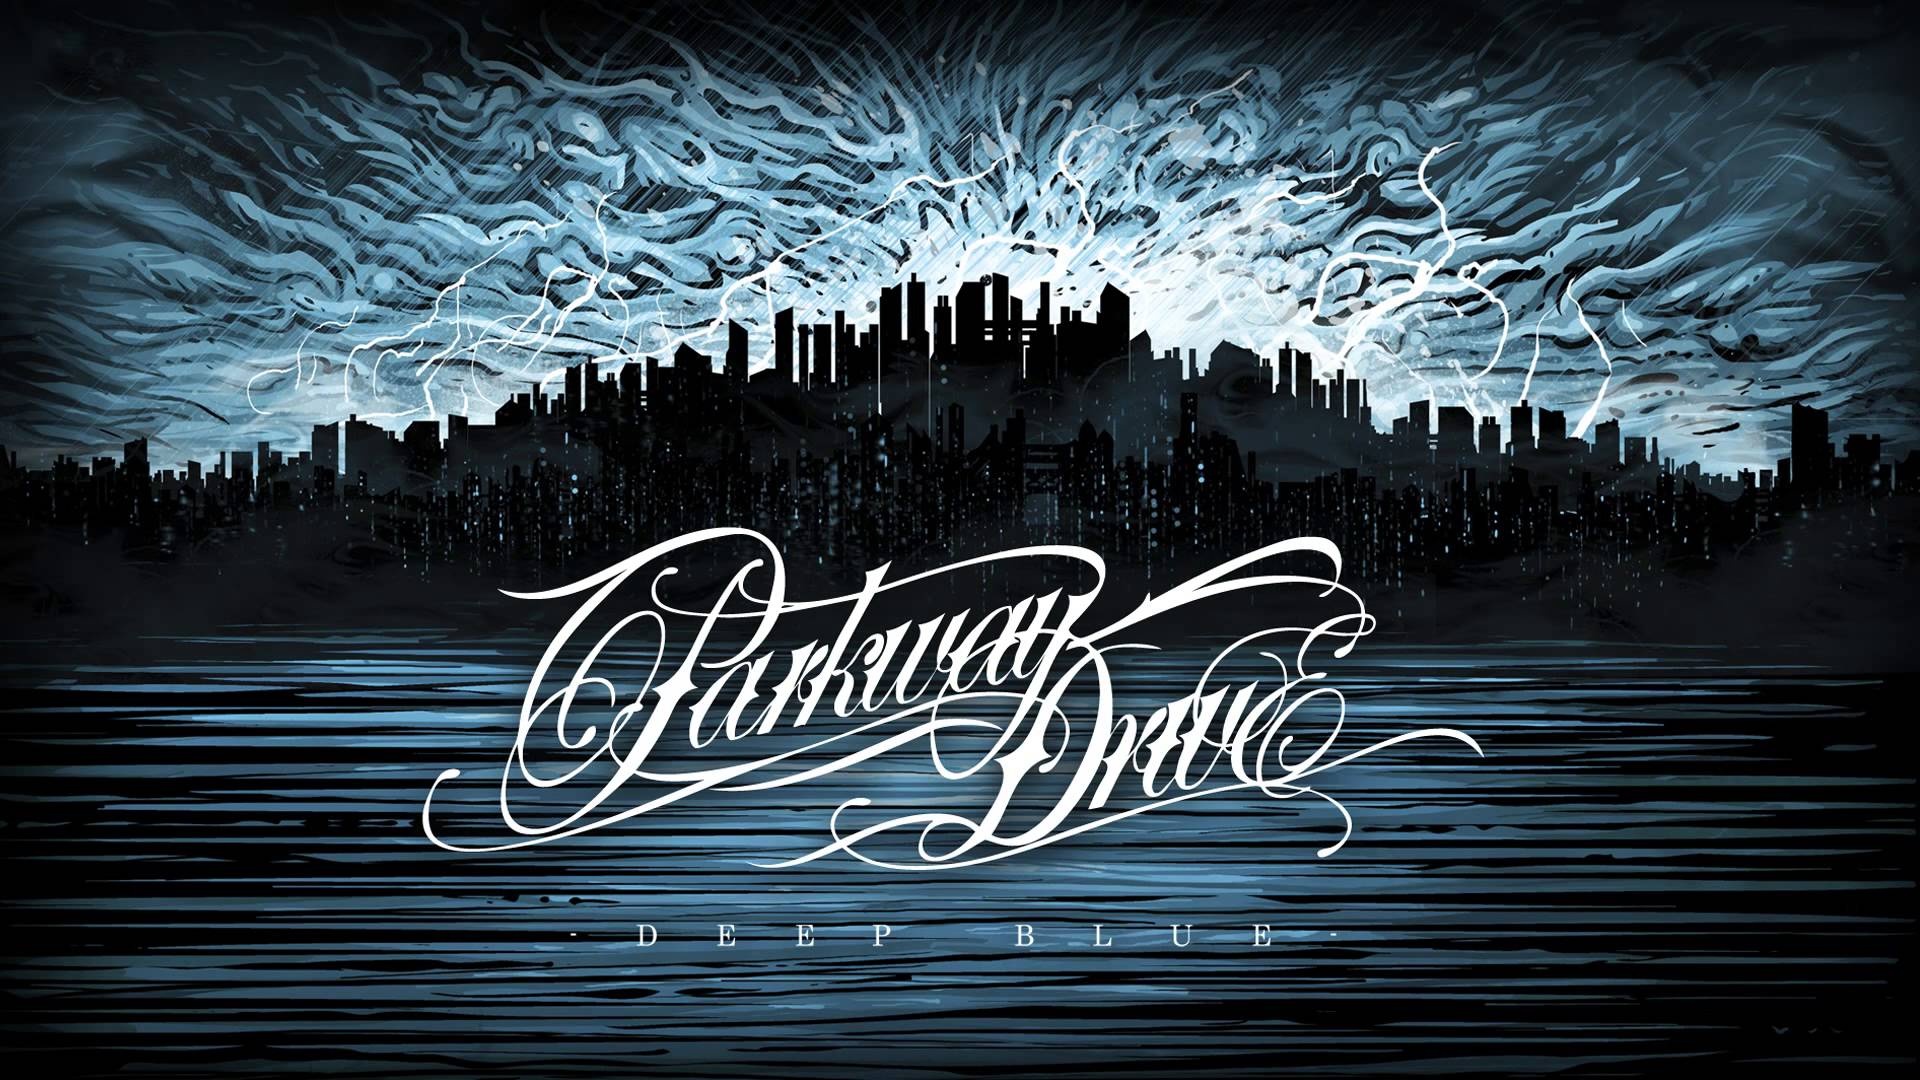 Parkway Drive logo, Music wallpapers, HQ pictures, 2019 4K images, 1920x1080 Full HD Desktop